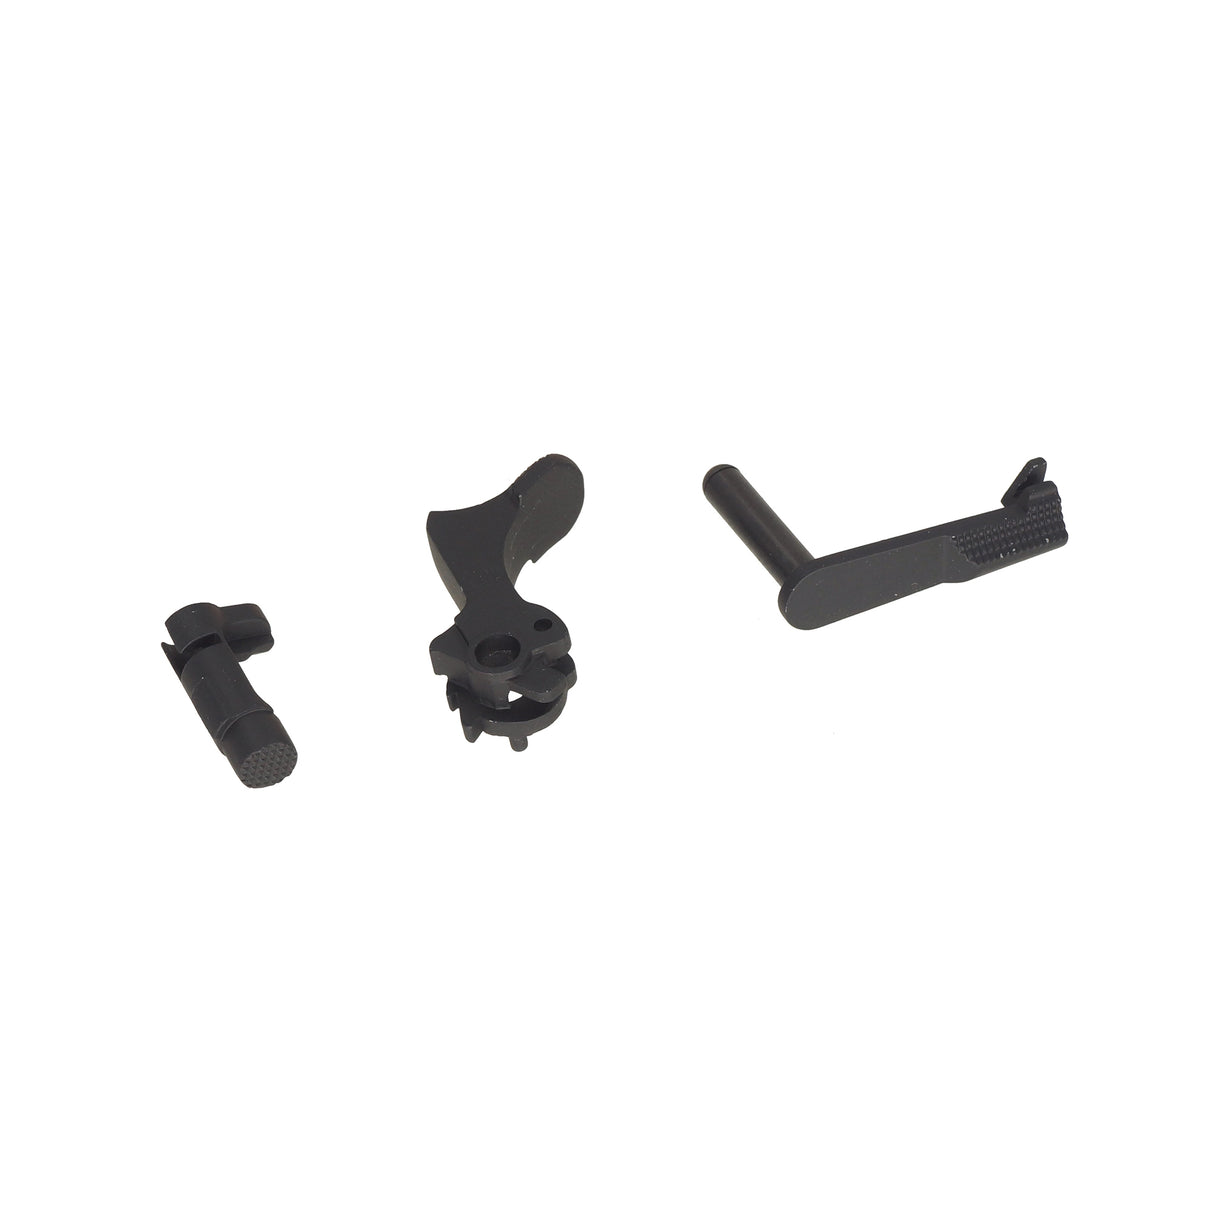 Double Bell Original Replacement Hammer Parts for M1911 ( 1911-TKJ )